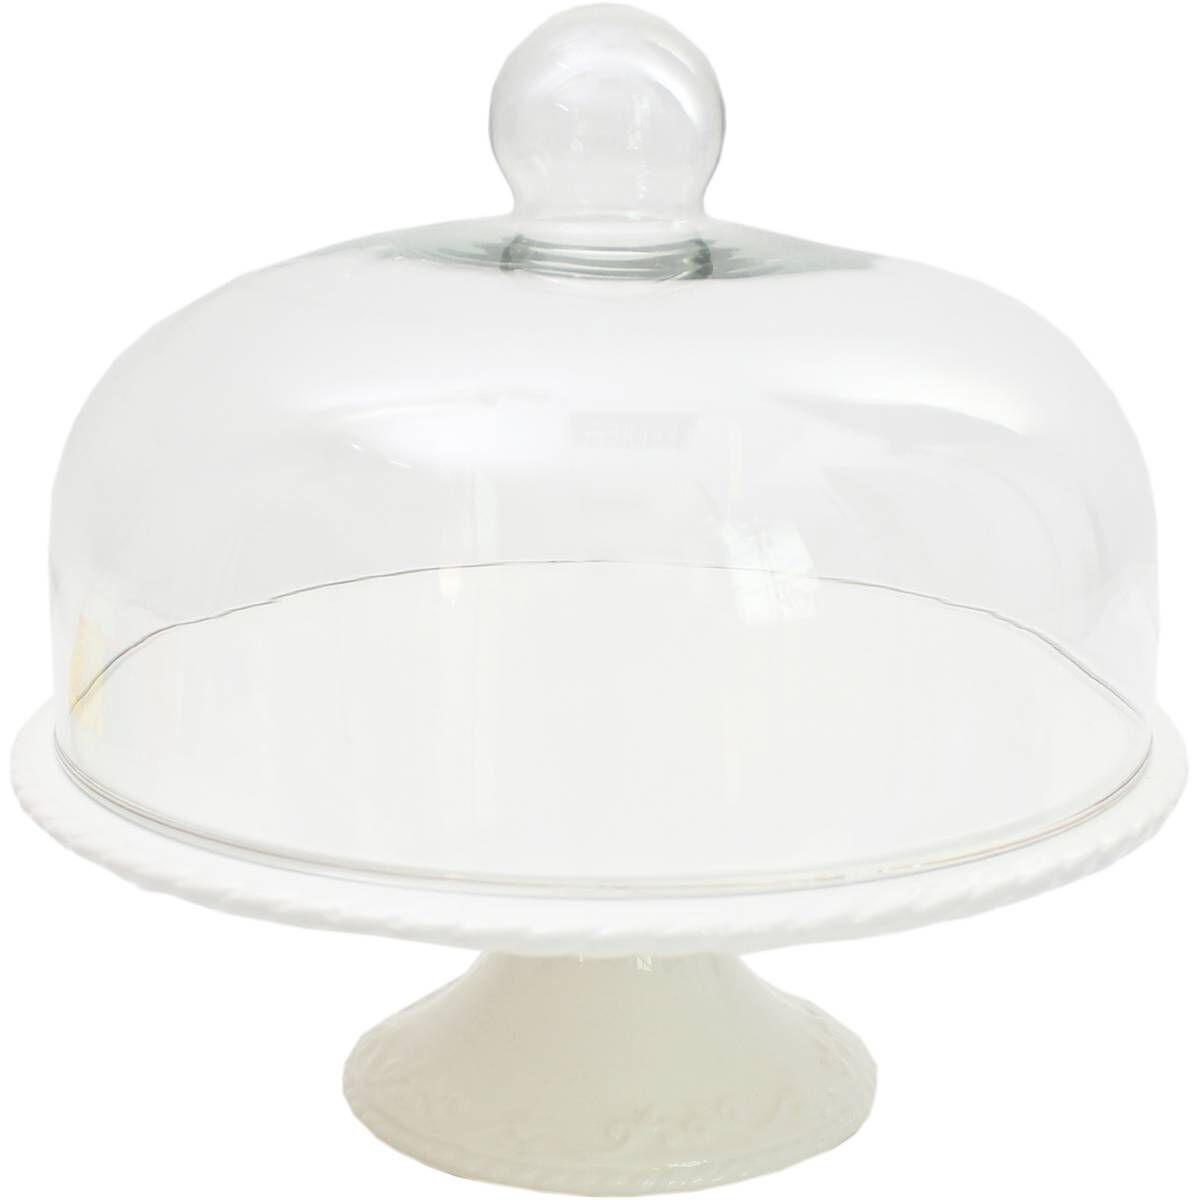 Decorative Glass Cake Stand with Glass Foot - Motta Living